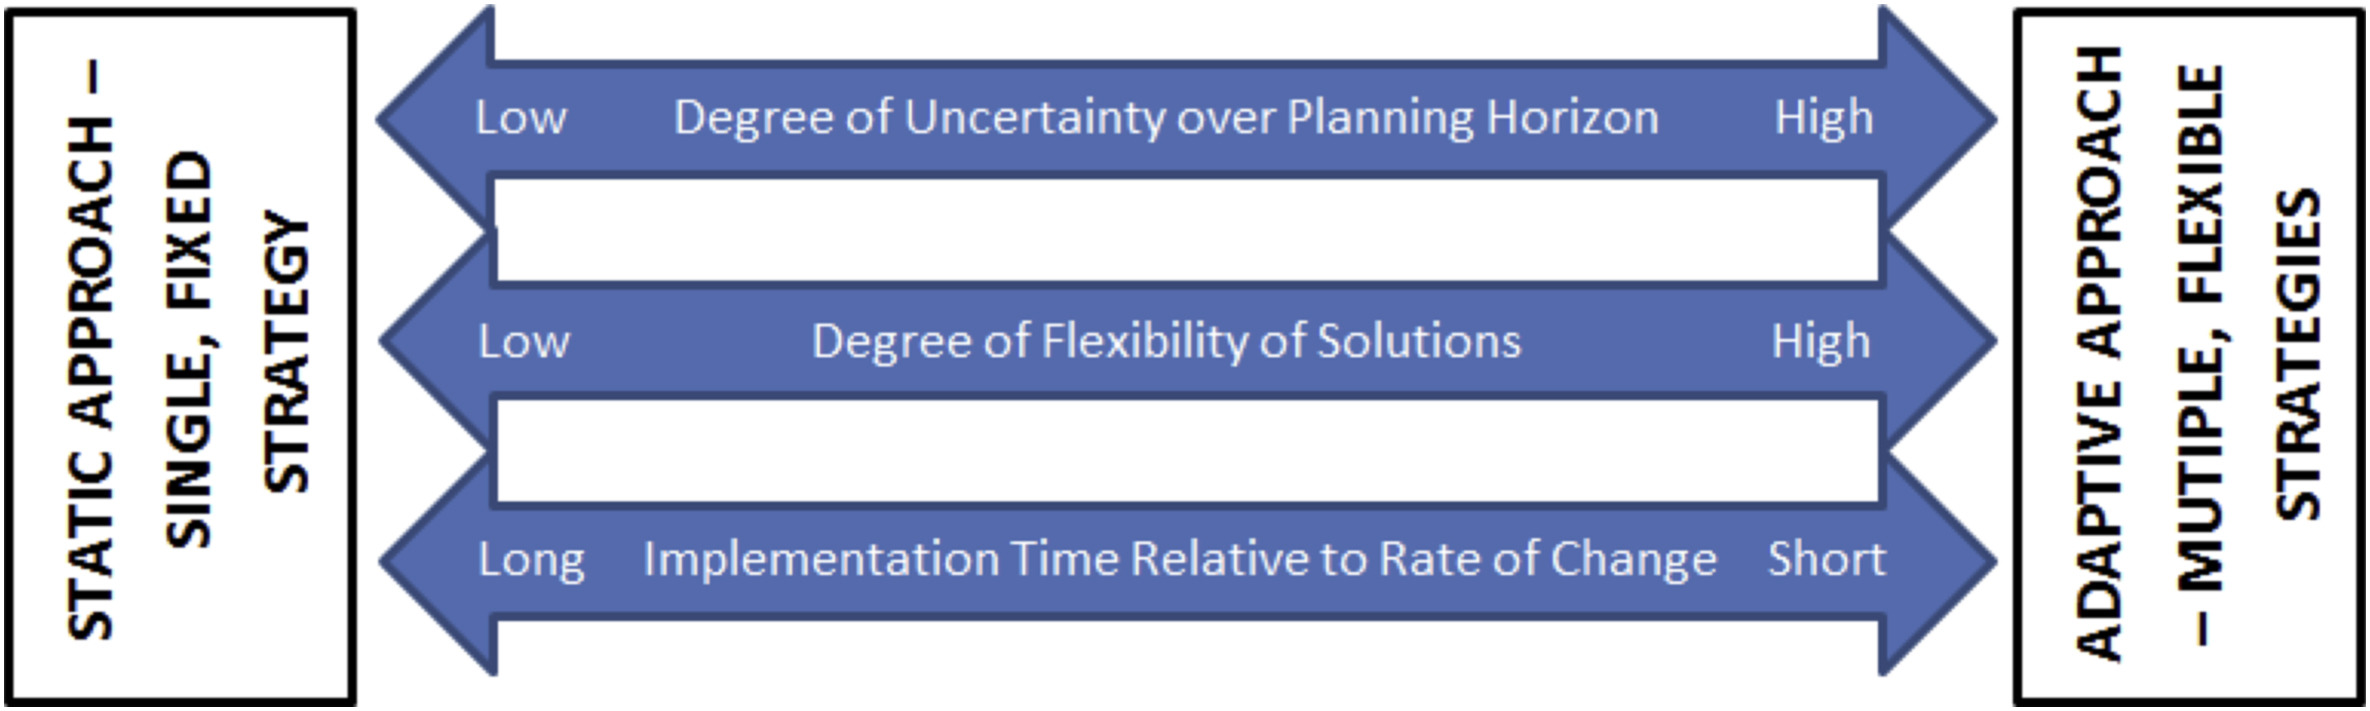 Adaptive rather than static approaches to robustness are more appropriate when uncertainty over the planning horizon is high, flexibility of solutions is high, and implementation time relative to rate of change is high.